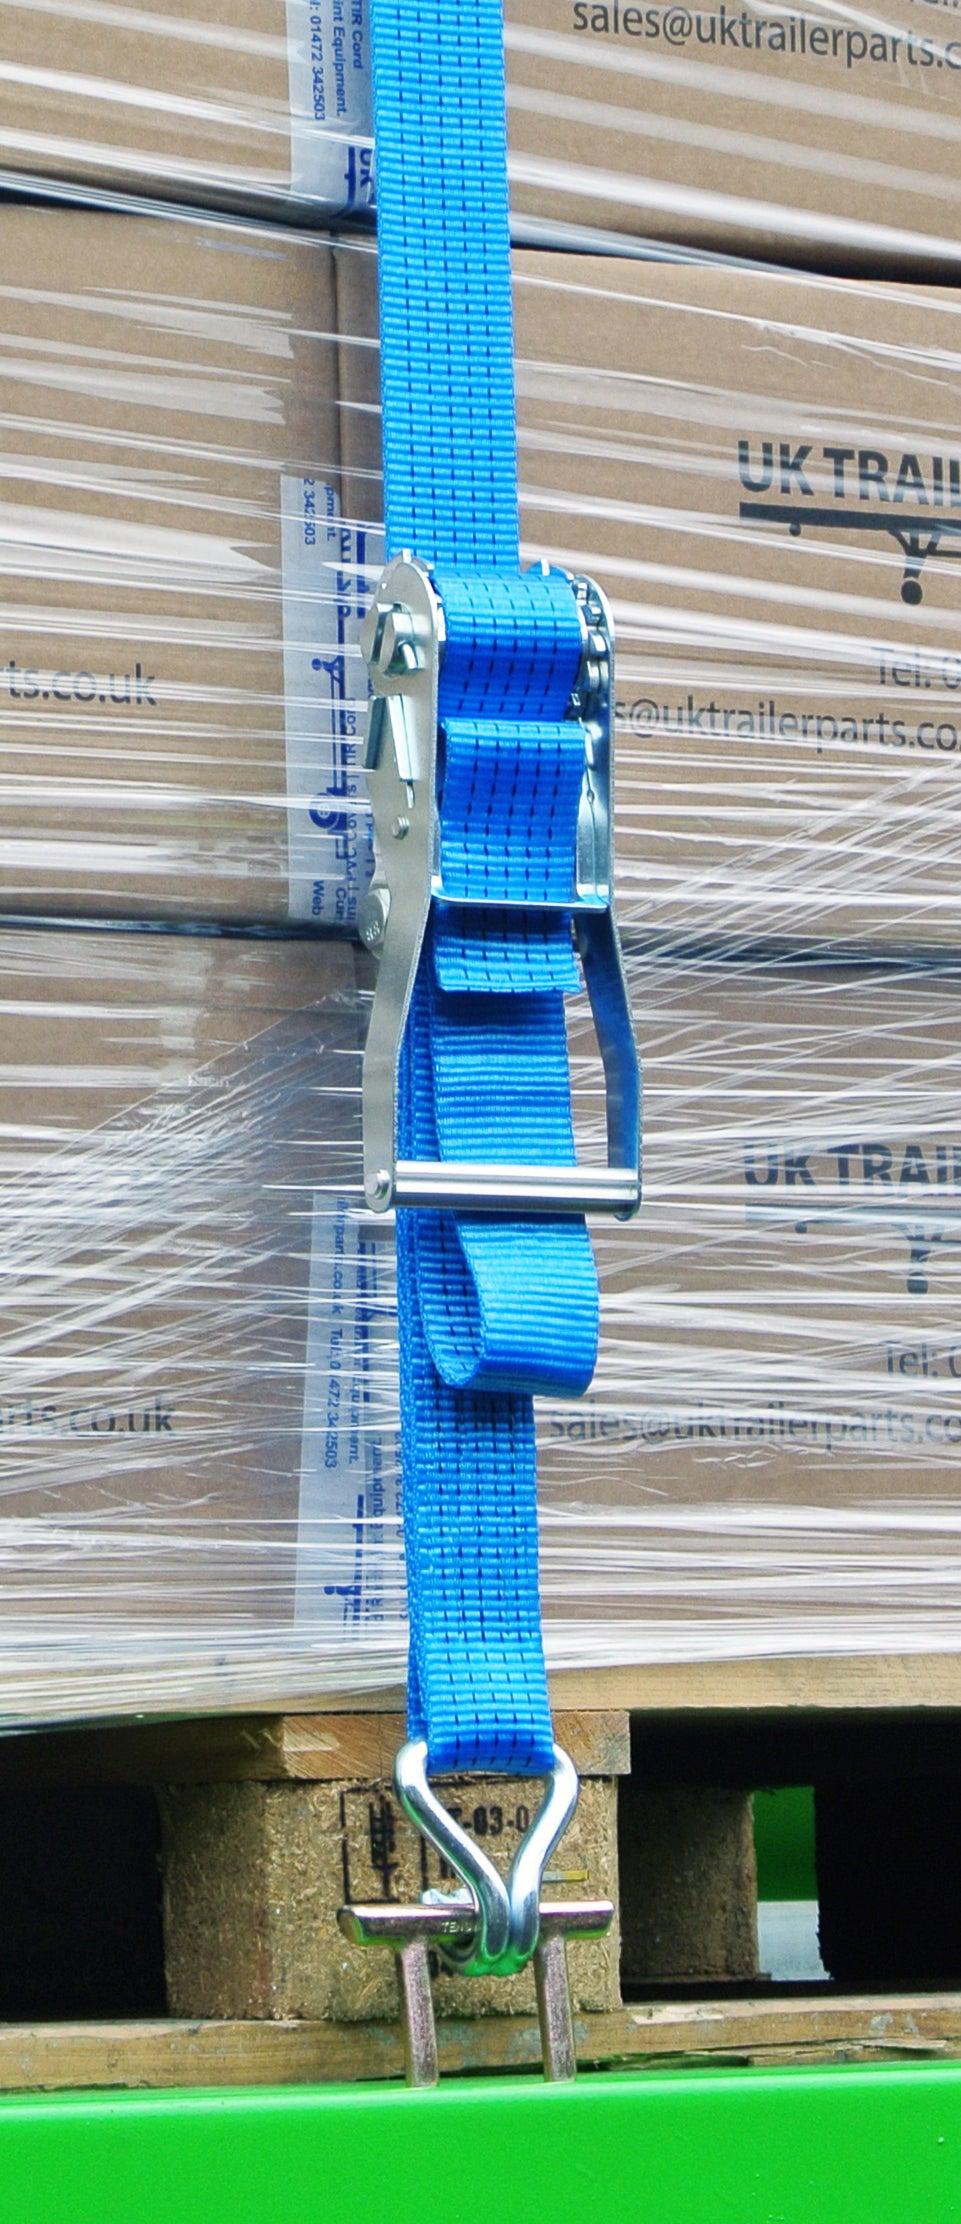 5000kg ratchet strap with claw. Fitten on pallet with boxes.